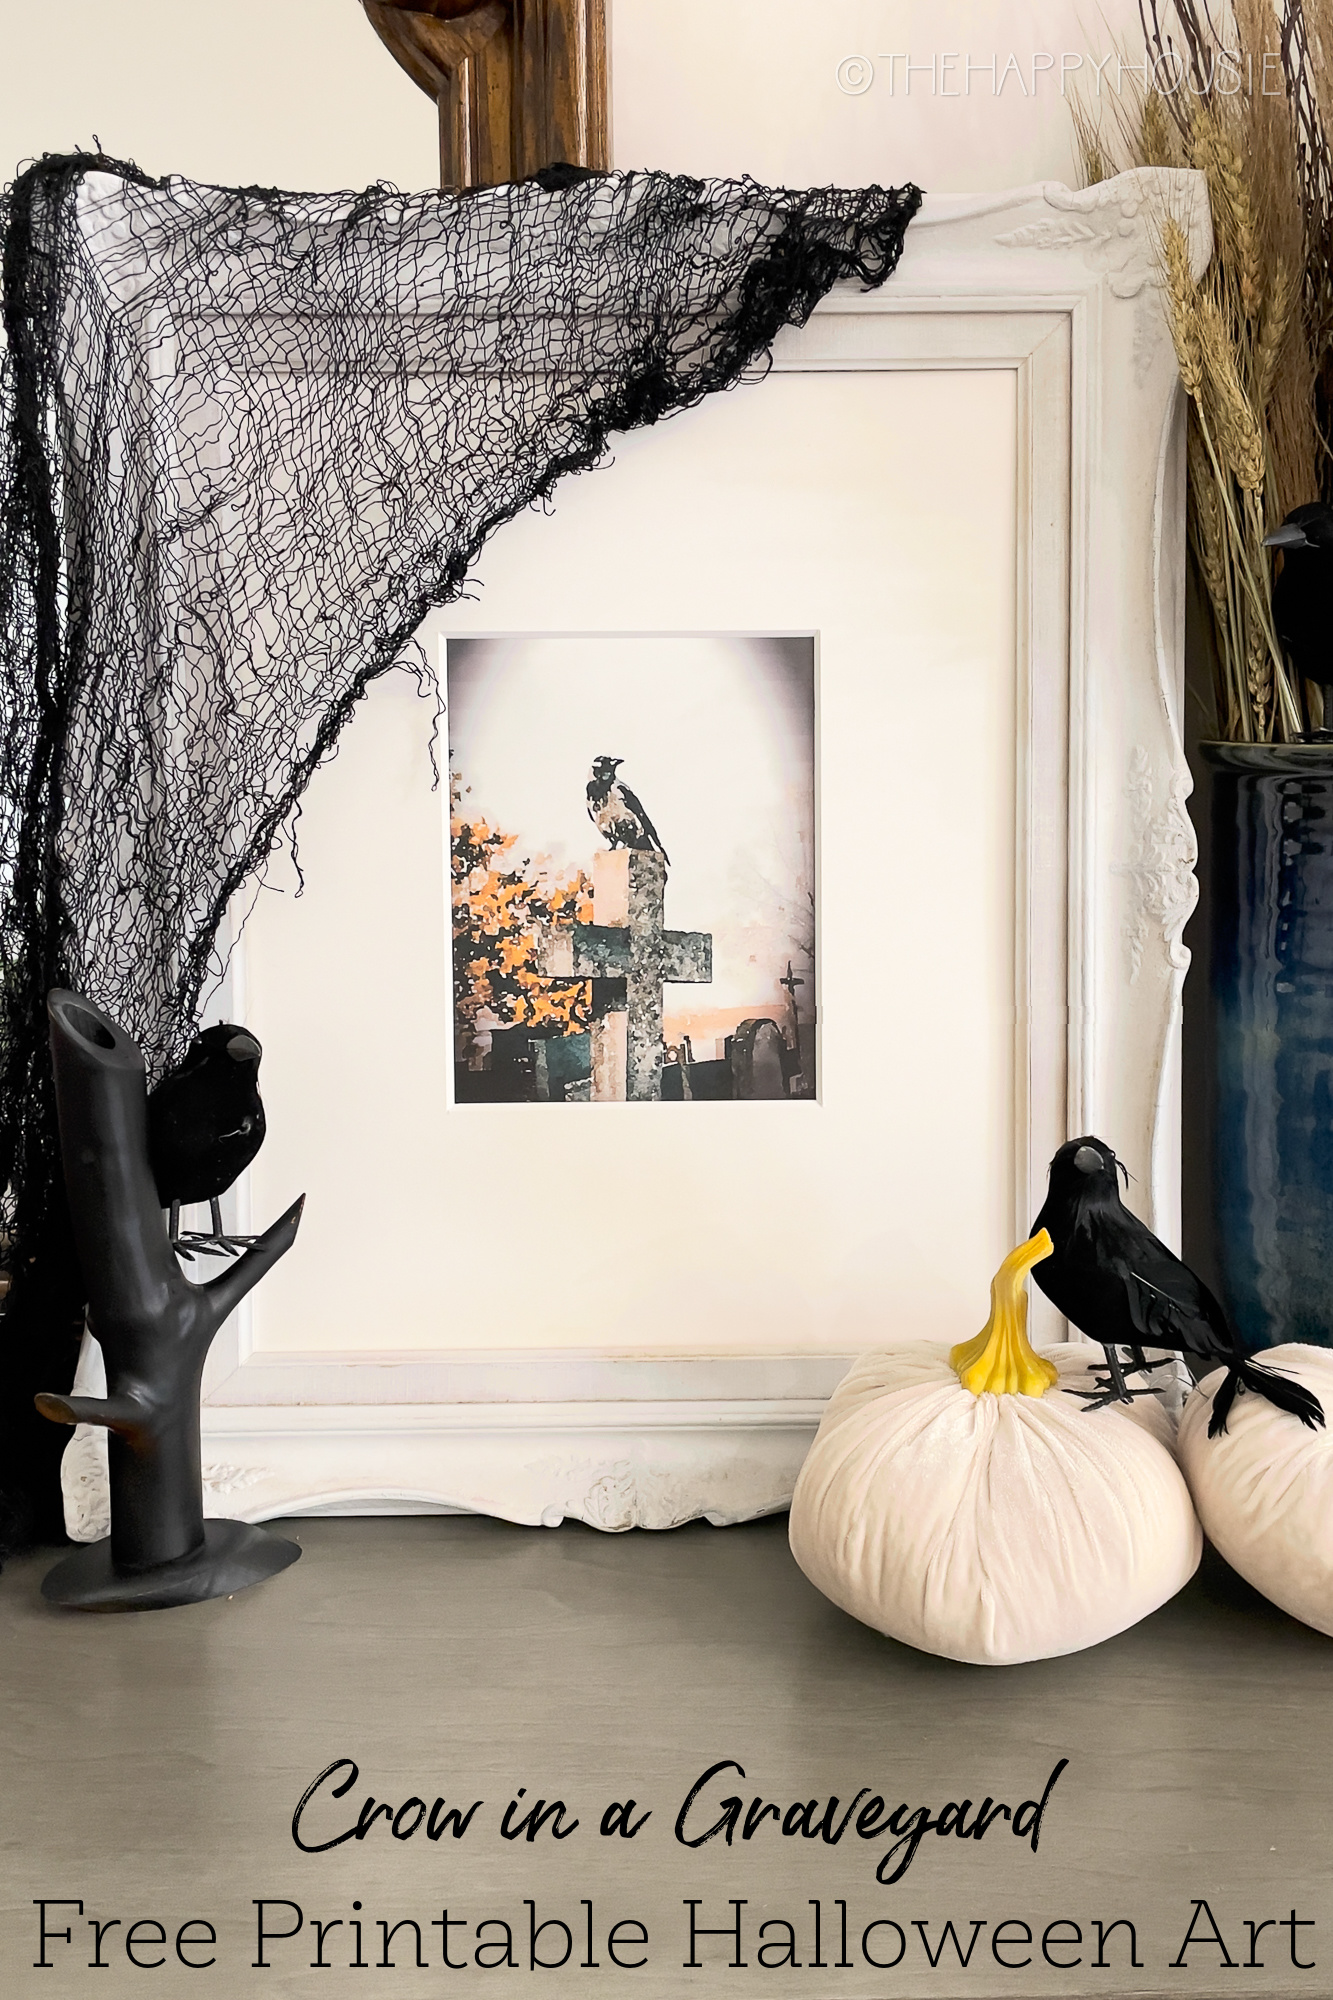 image showing a piece of free printable Halloween art